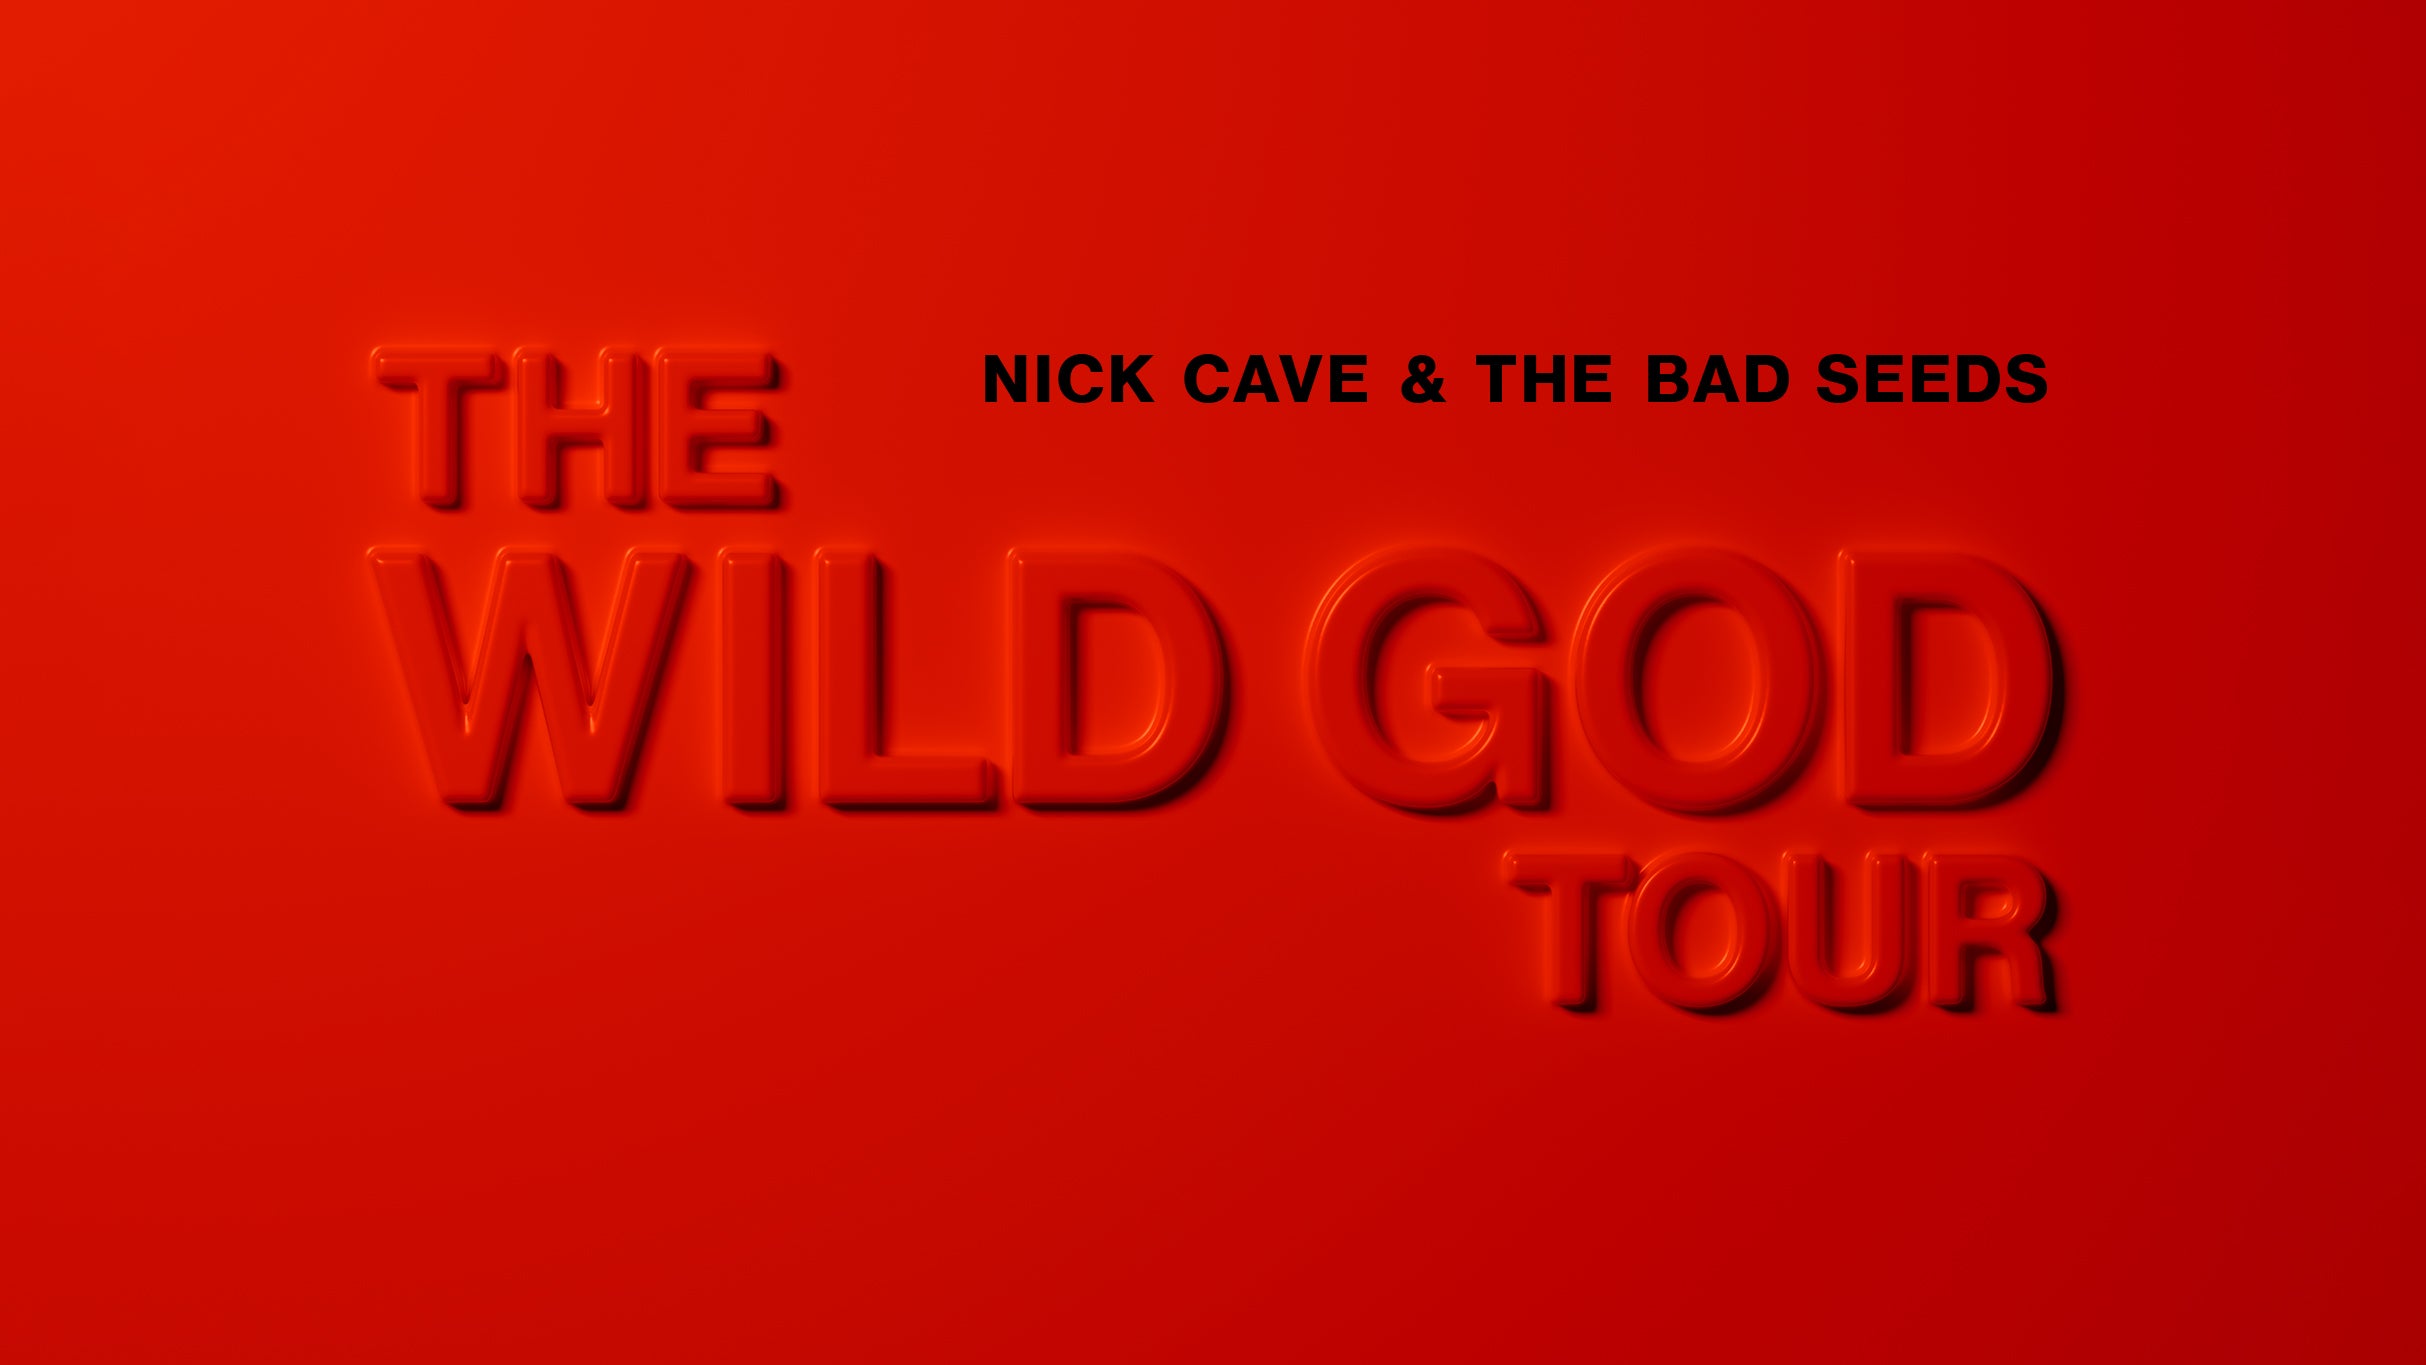 Nick Cave & the Bad Seeds : The Wild God Tour in Dublin promo photo for Artist presale offer code